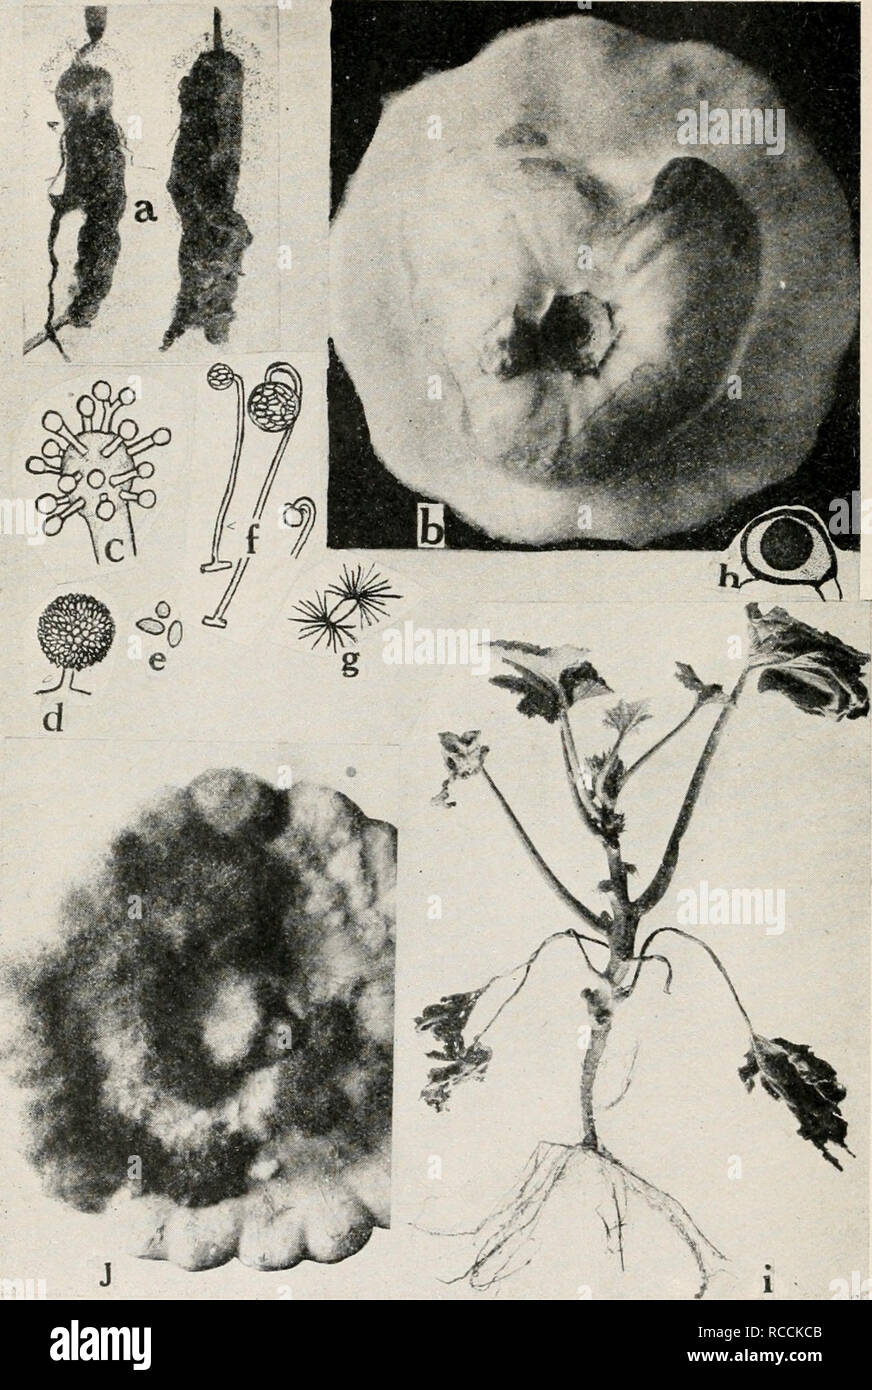 . Diseases of truck crops and their control. Plants -- Diseases. Fig. 41. Squash Diseases. a. Showing squash blossoms invaded by the fungus Choanophora ciicurbitarum, b. squash entirely rotted by the Choanophora fungus, c. young conidiophore of Choanophora with ramuli developing on the primary vesicle, d. mature capitulum covered with a layer of conidia, e. conidia, /. sporangia and columella, g. sporangio spores with tufts of hair-like appendages, h. mature zygospore («, c. to /;. after Wolf), i. Fusarium wilt of young squash plants, .;'. Rhizopus rot.. Please note that these images are extra Stock Photo